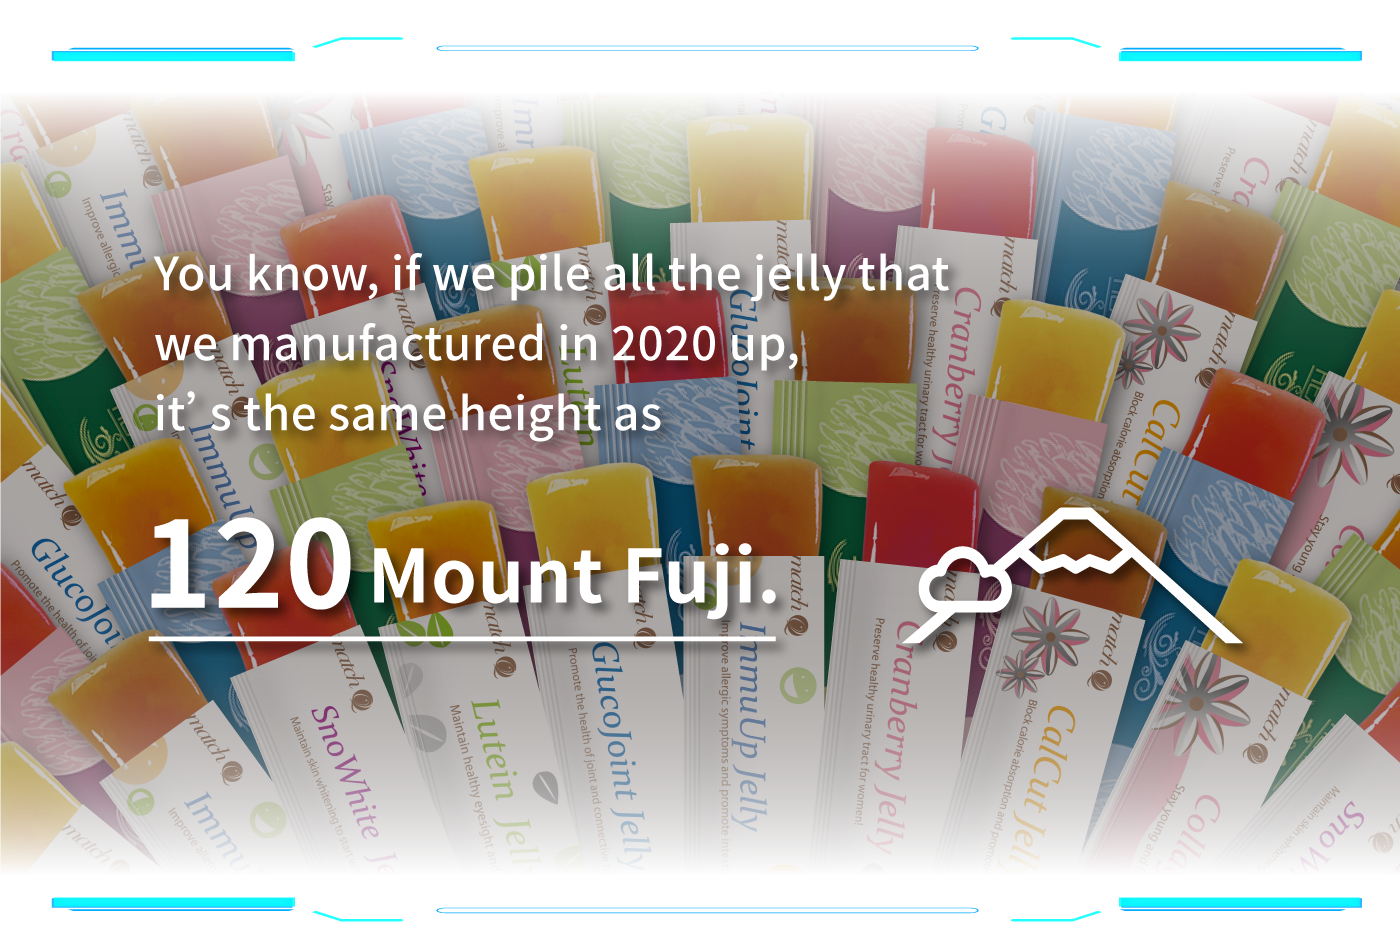 You know, if we pile all the jelly that we manufactured in 2020 up, it’s the same height as 120 Mount Fuji.